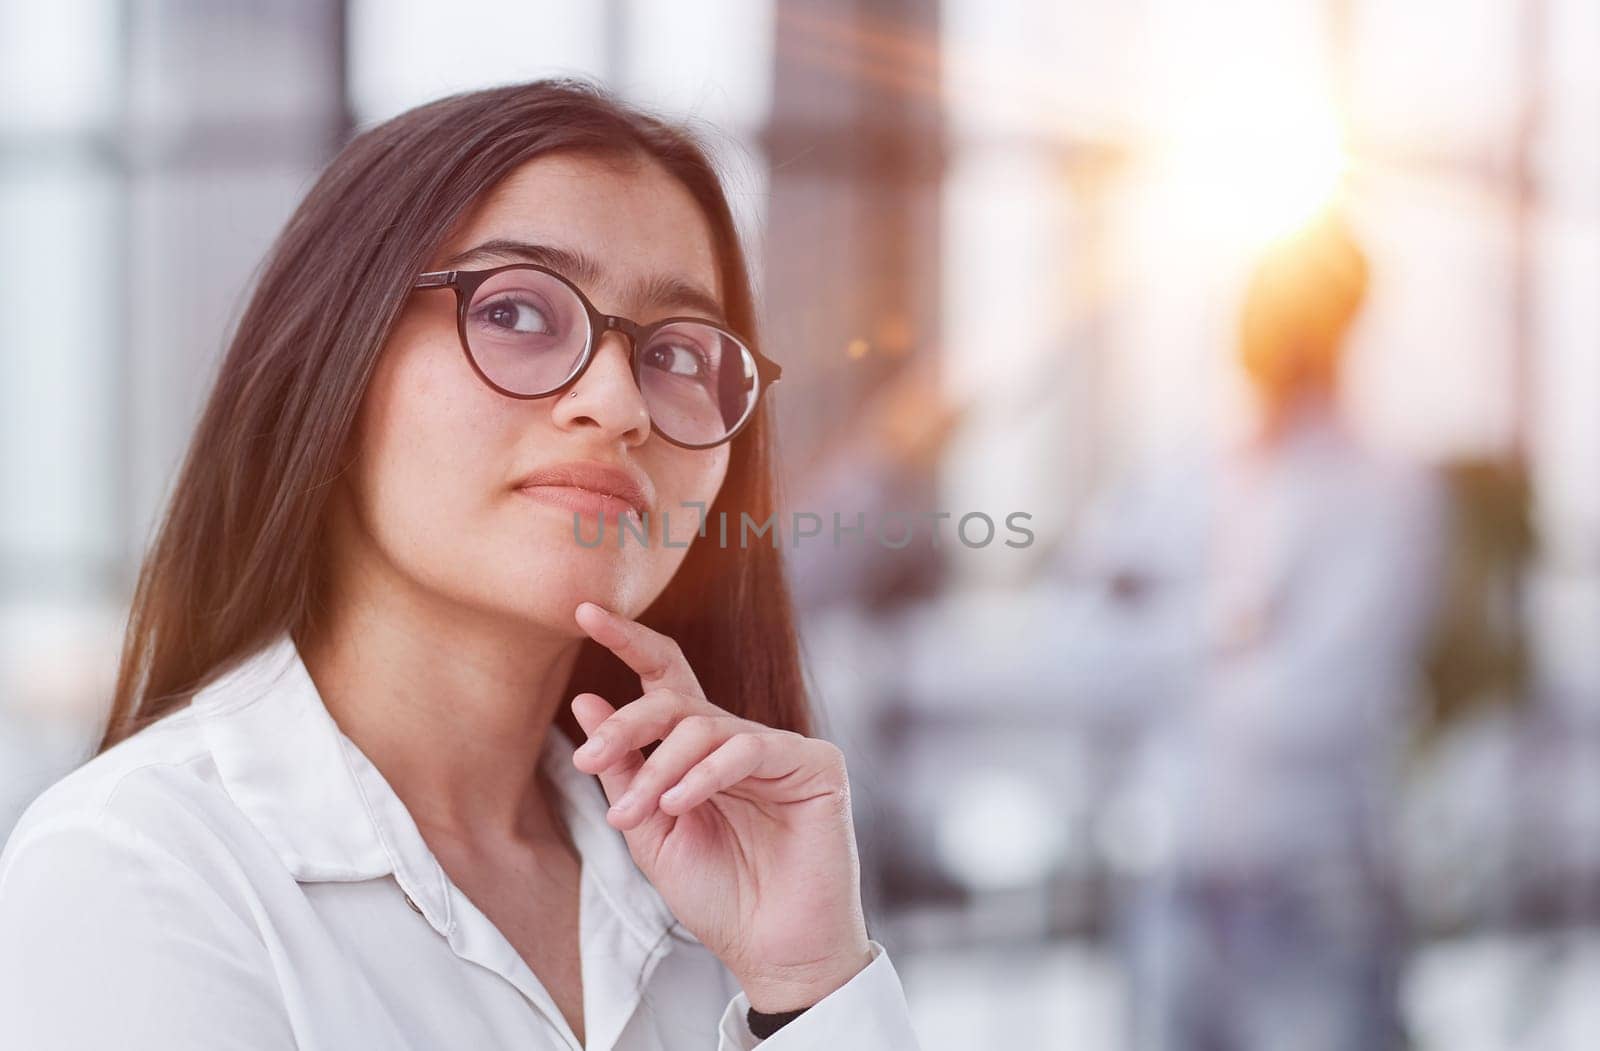 a girl stands in a modern office and looks at the camera by Prosto